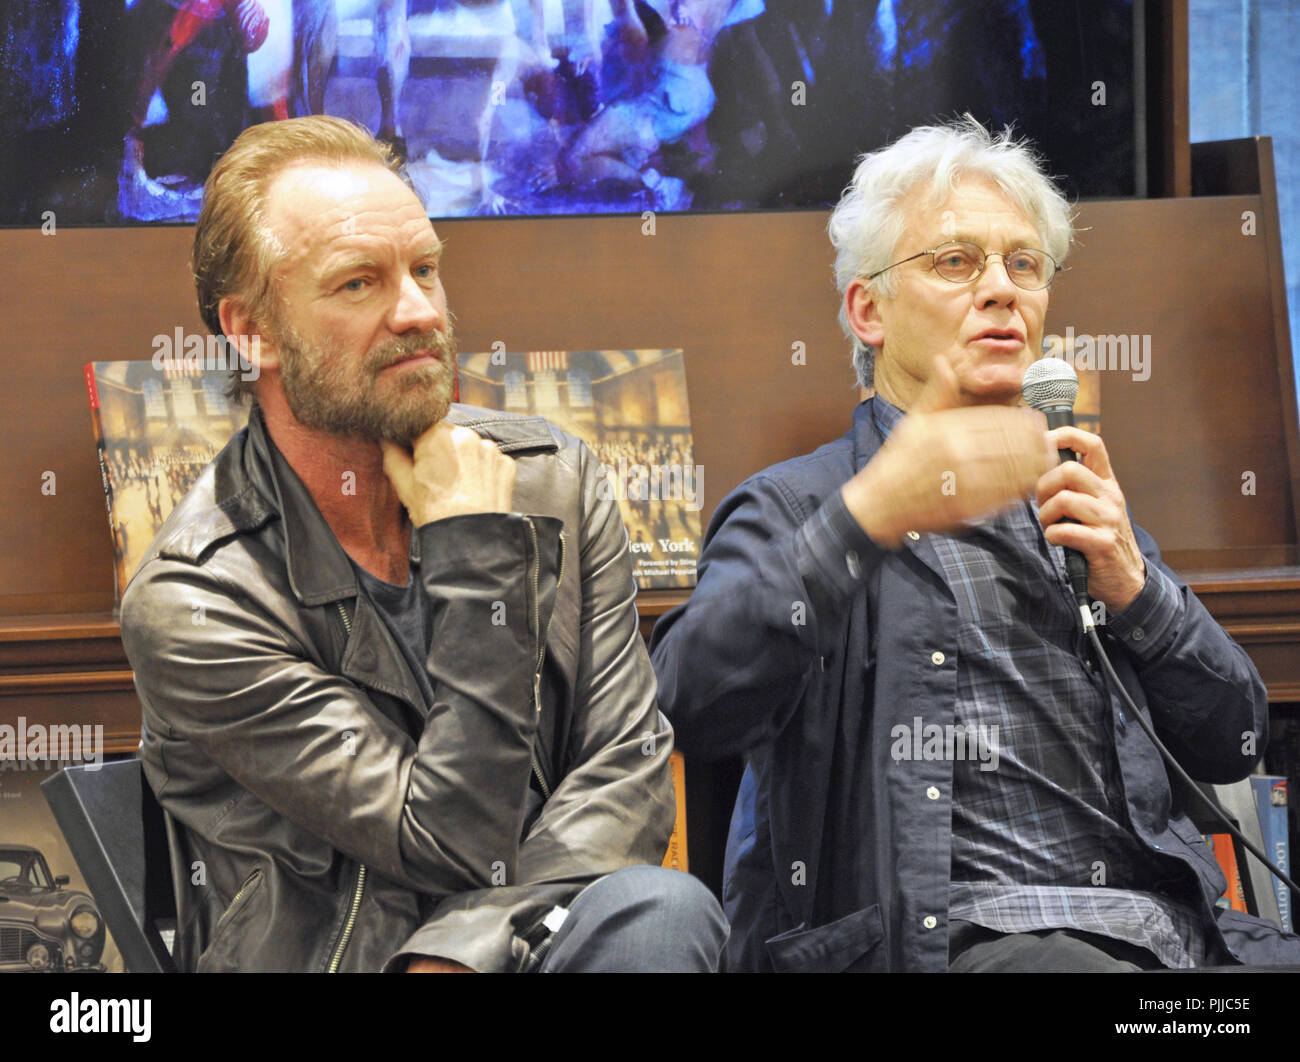 New York, NY. Sting joins his friend Bill Jacklin for his book signing at Rizzoli store downtown Manhattan. May 24, 2016. @ Veronica Bruno / Alamy Stock Photo